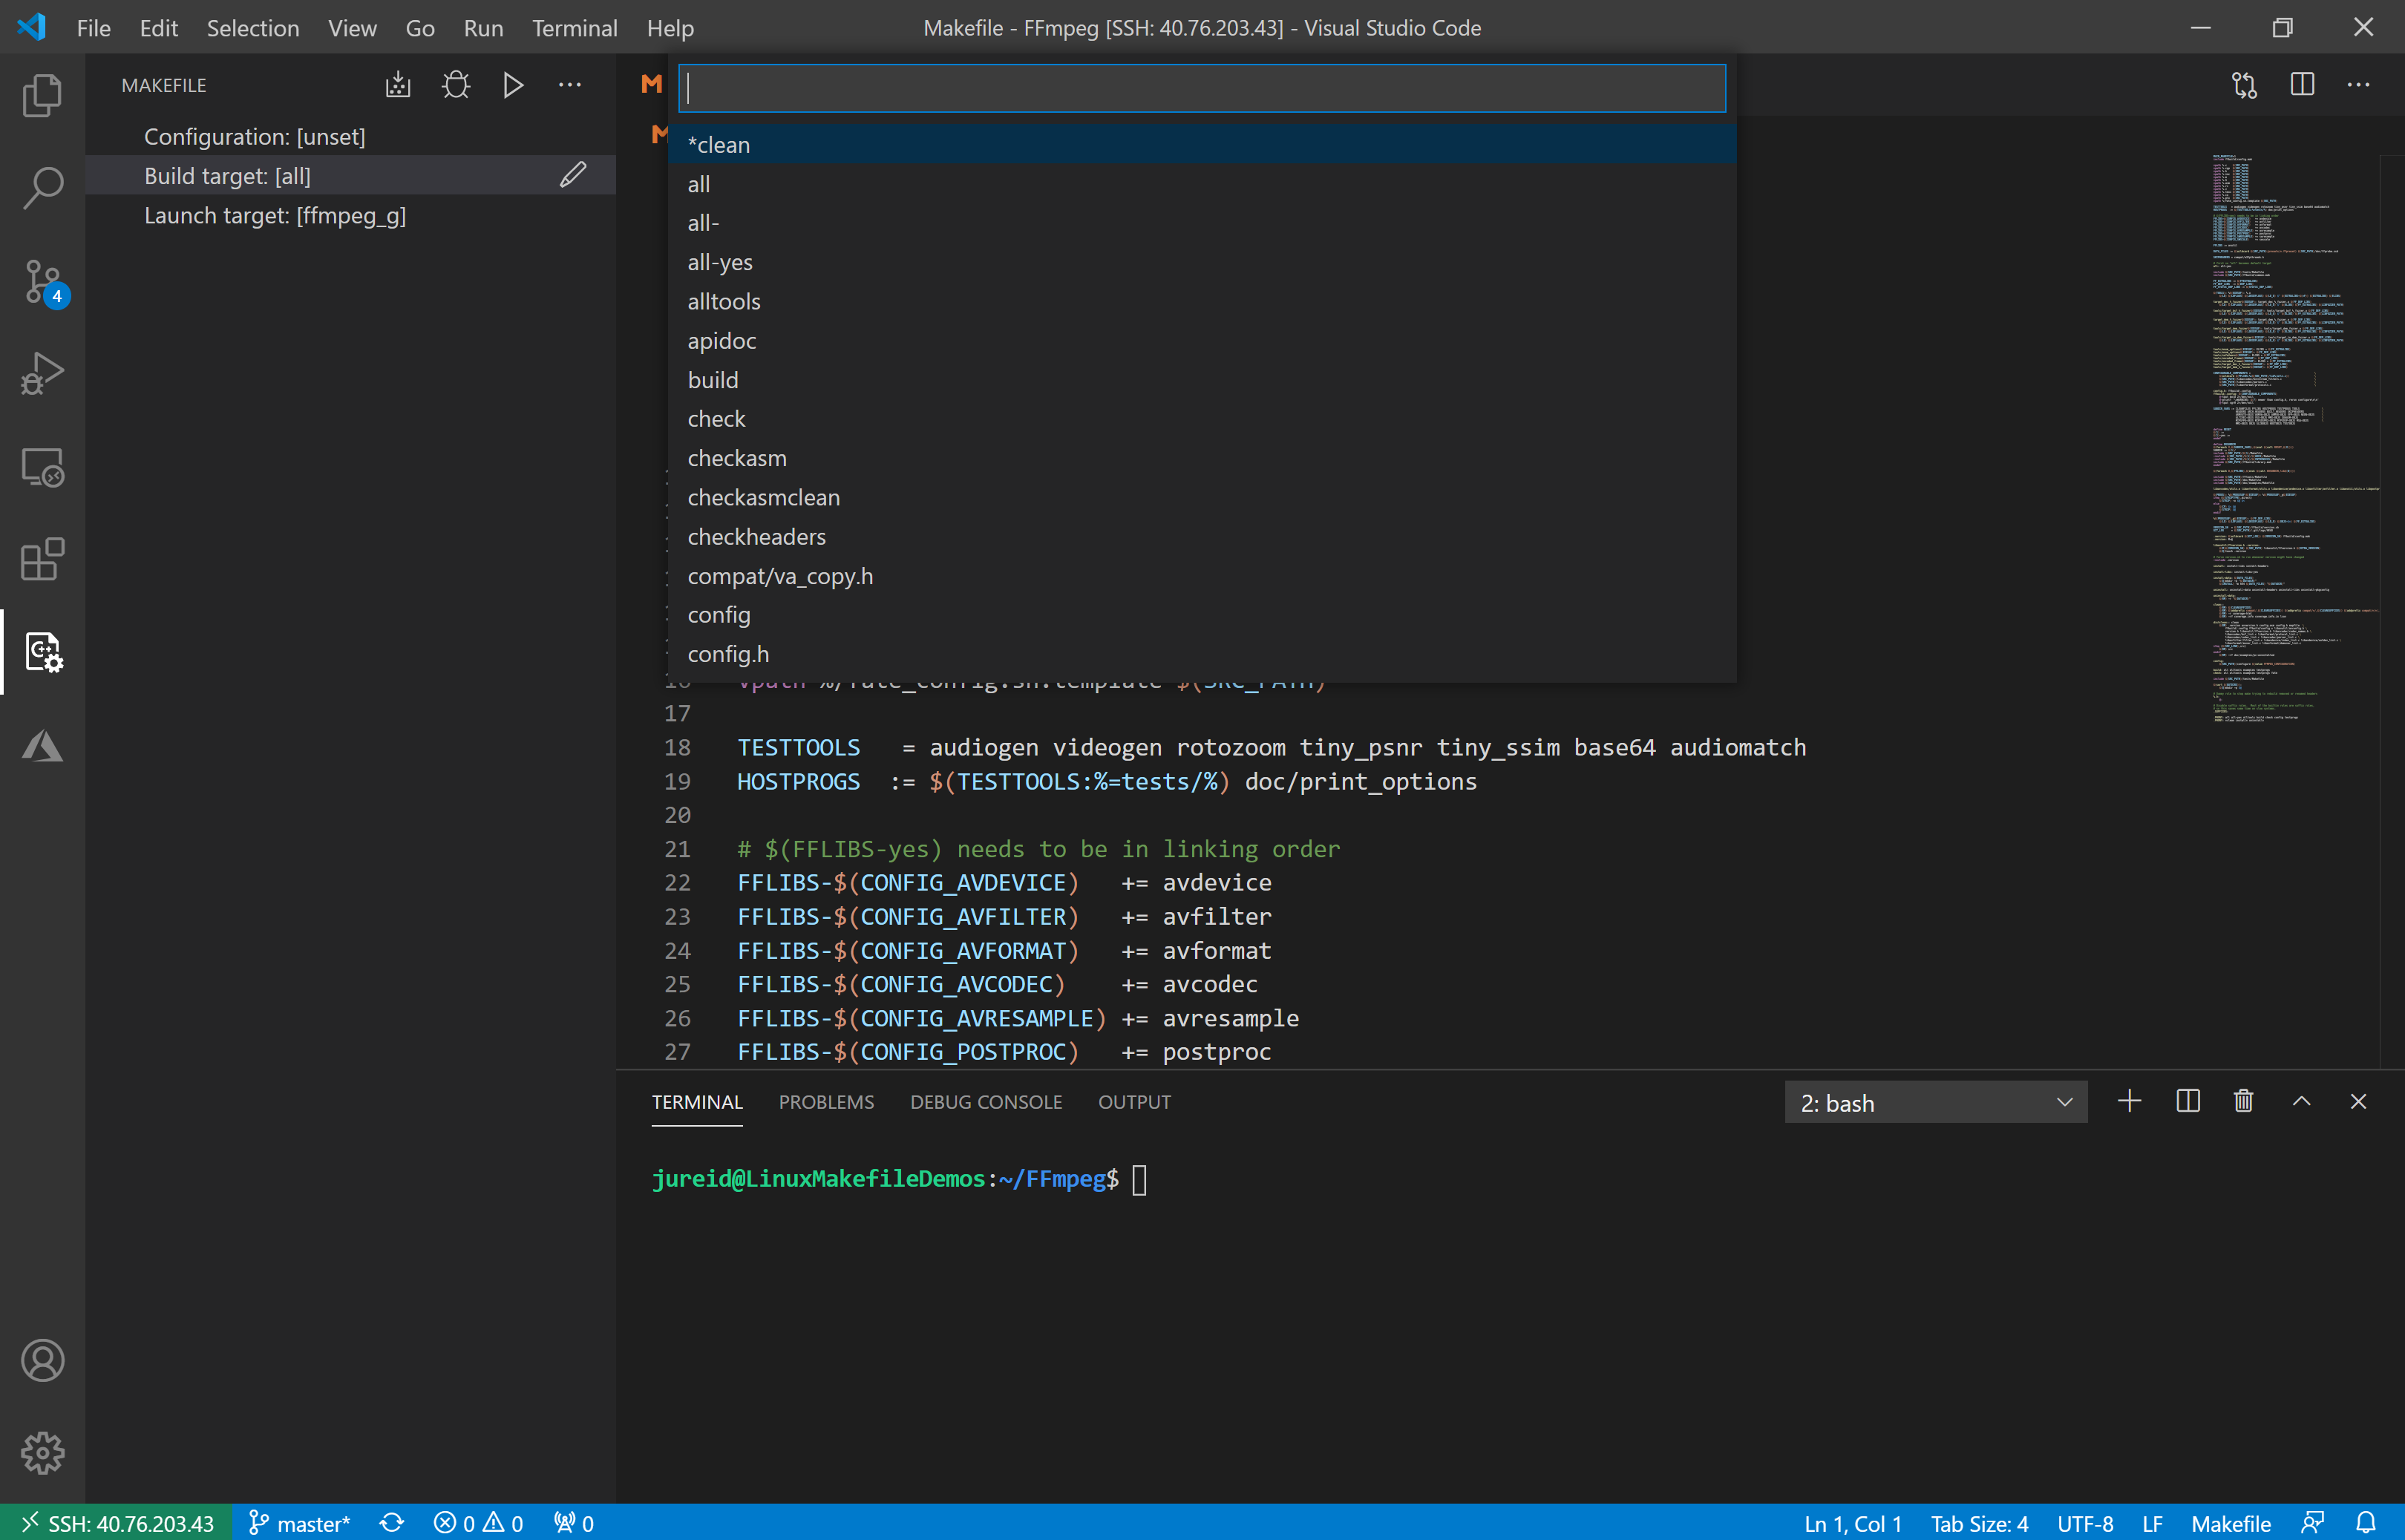 Now announcing: Makefile support in Visual Studio Code! - C++ Team